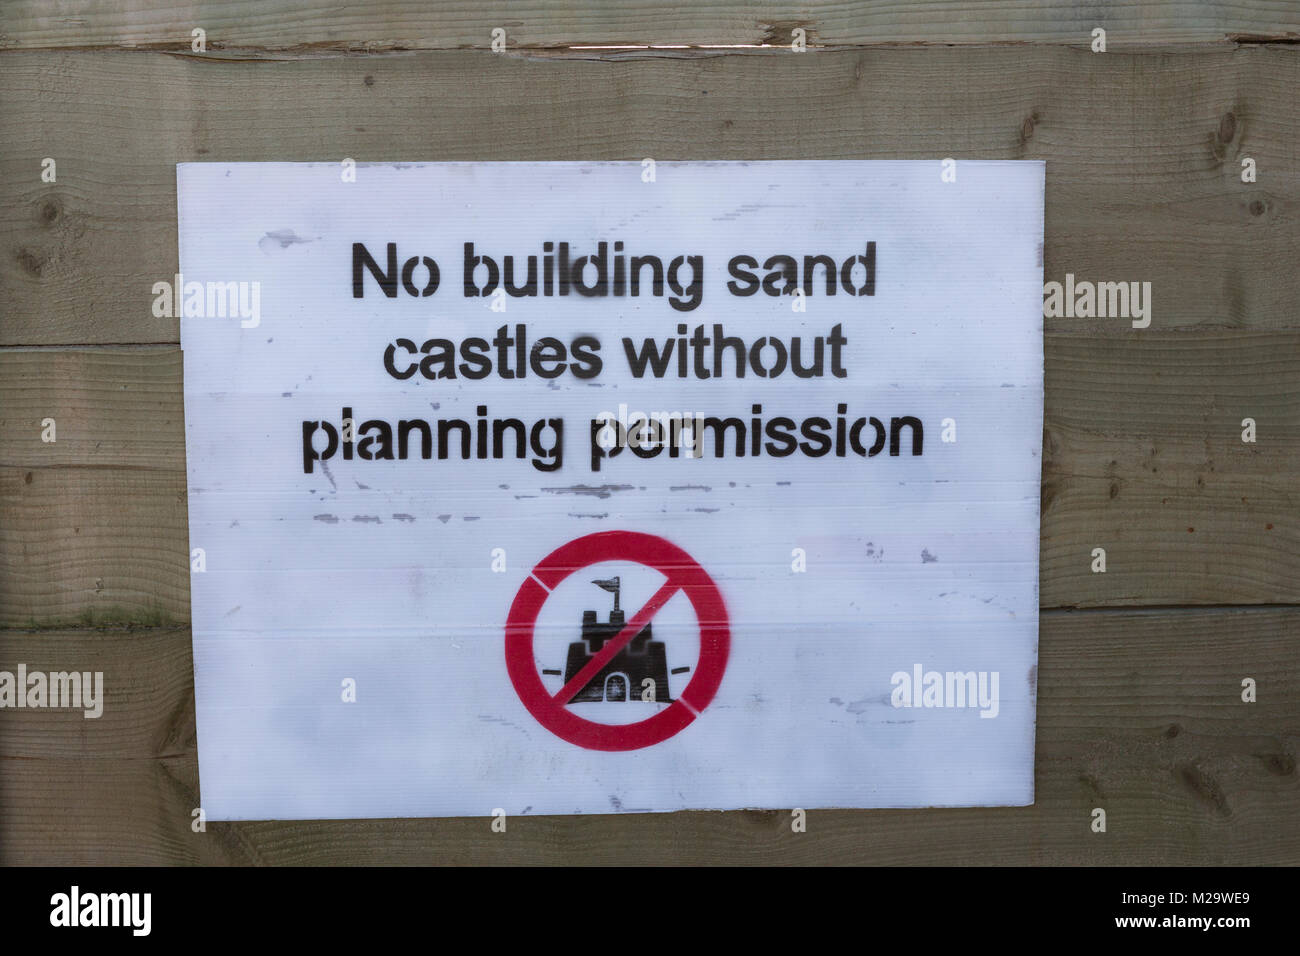 Funny joke sign on beach at Swansea saying No building sand castles without planning permission Stock Photo